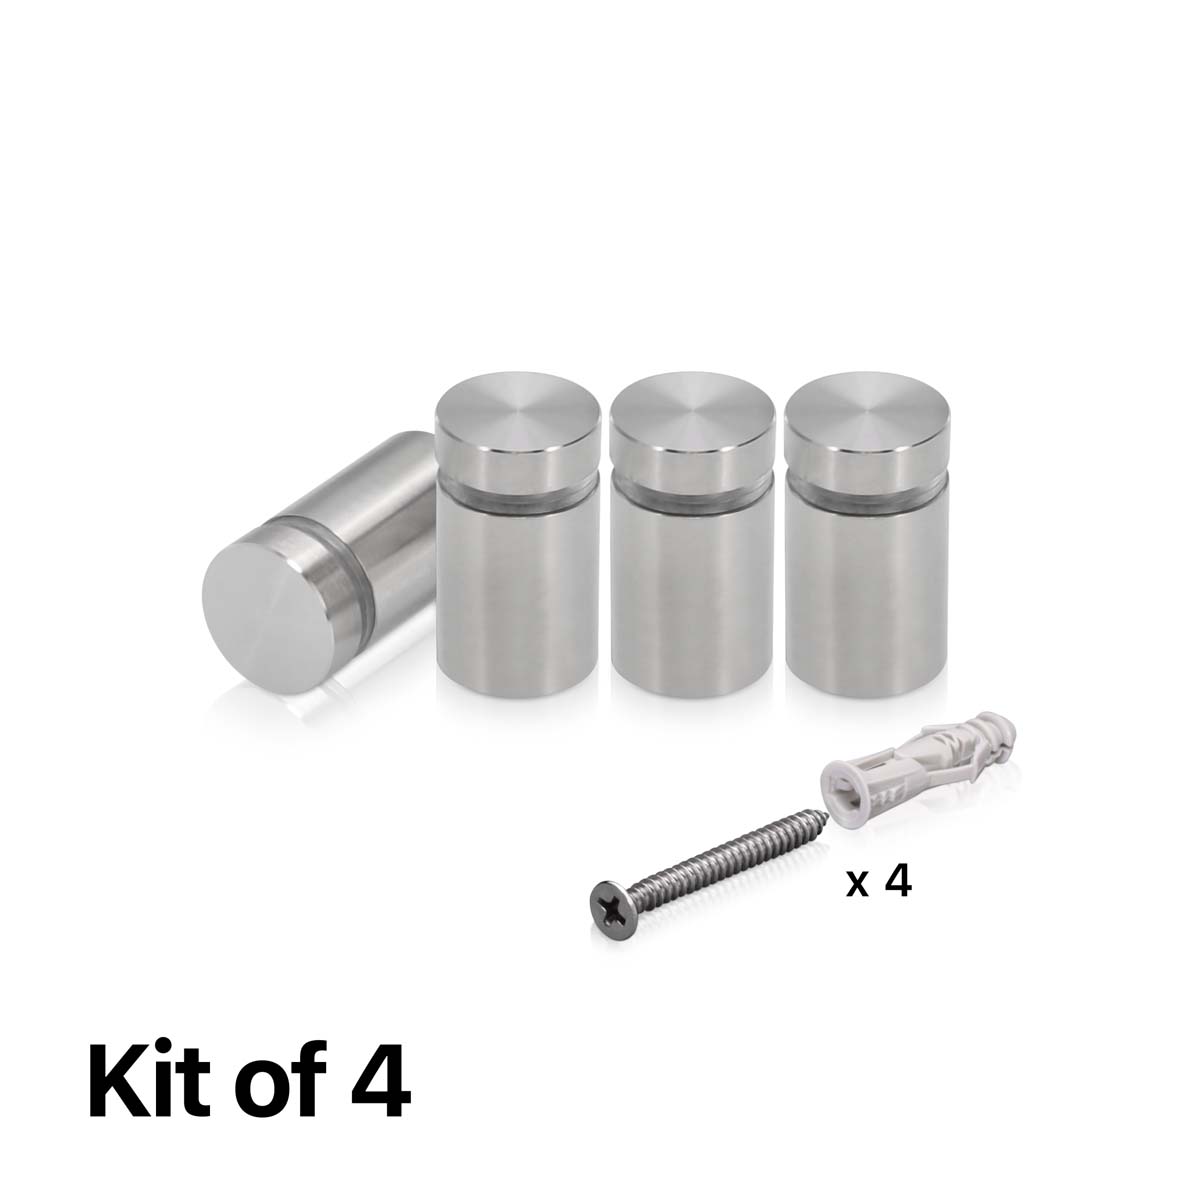 Set of 4) Hollow Stainless Steel Standoff, Diameter: 5/8'', Standoff: 1/2''  with (4) 2208Z Screws and (4) LANC1 Anchors for concrete or drywall (For  Inside Use Only) [Required Material Hole Size: 7/16'']